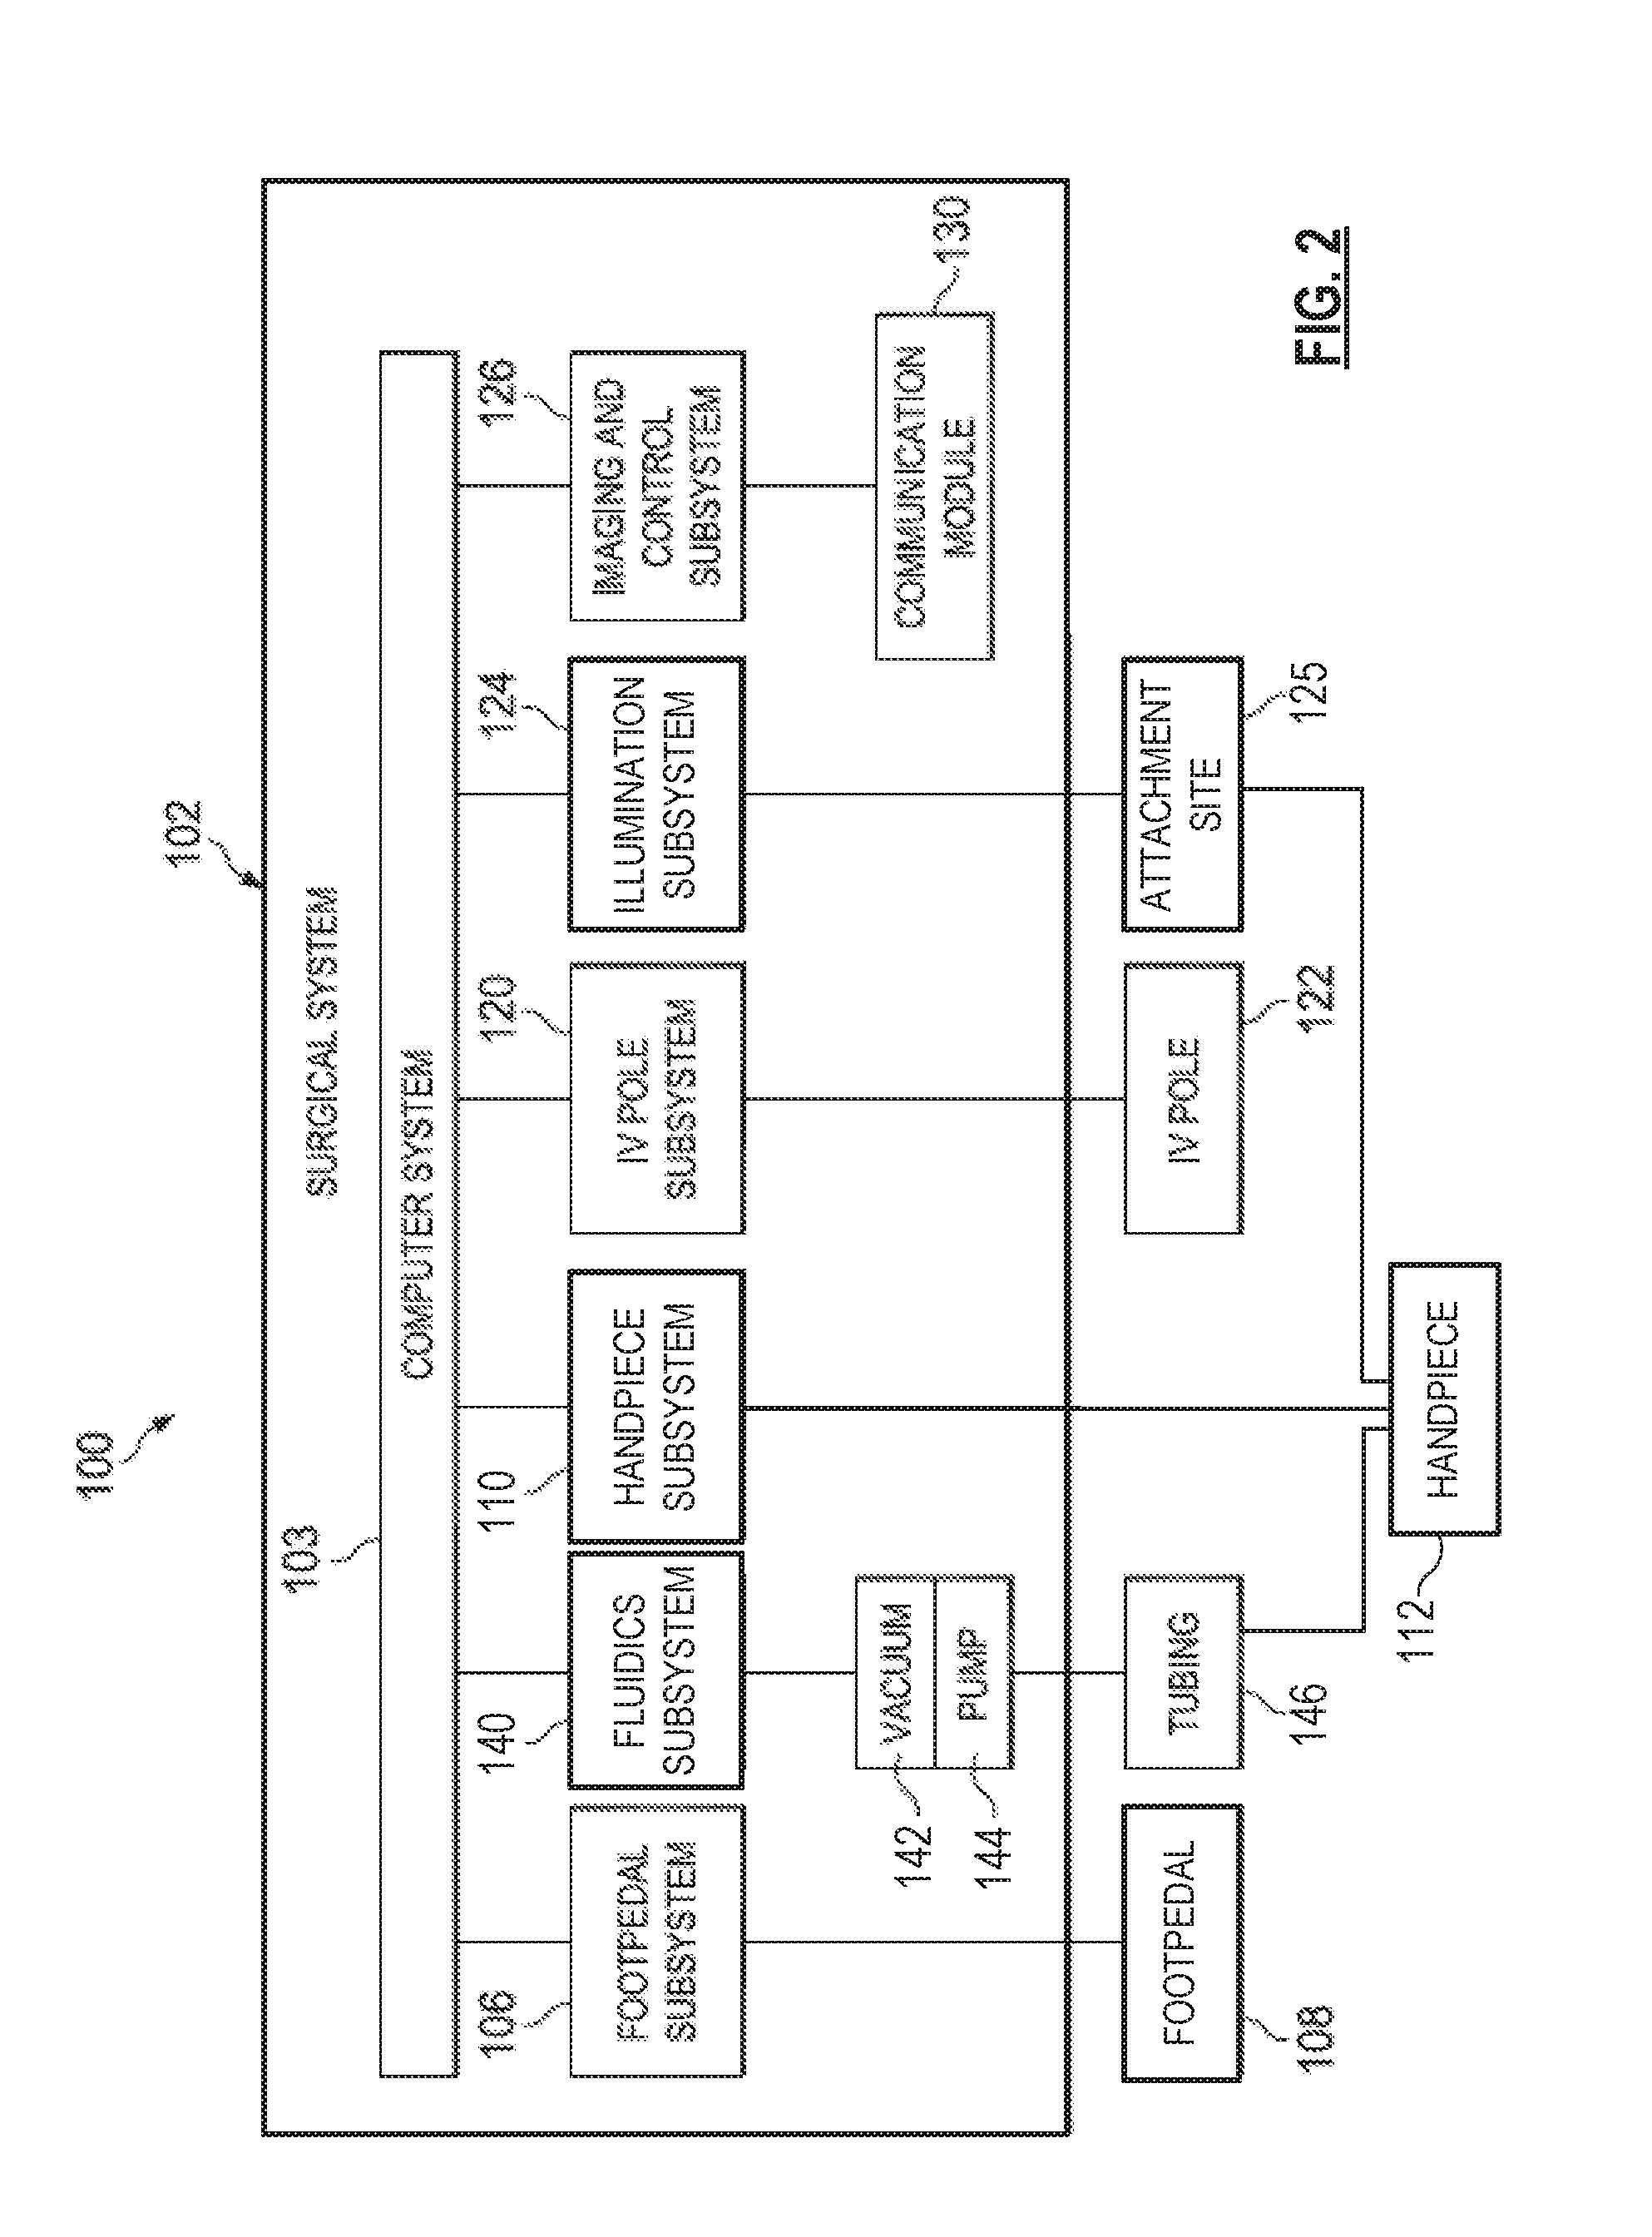 Vitreous cutter with integrated illumination system